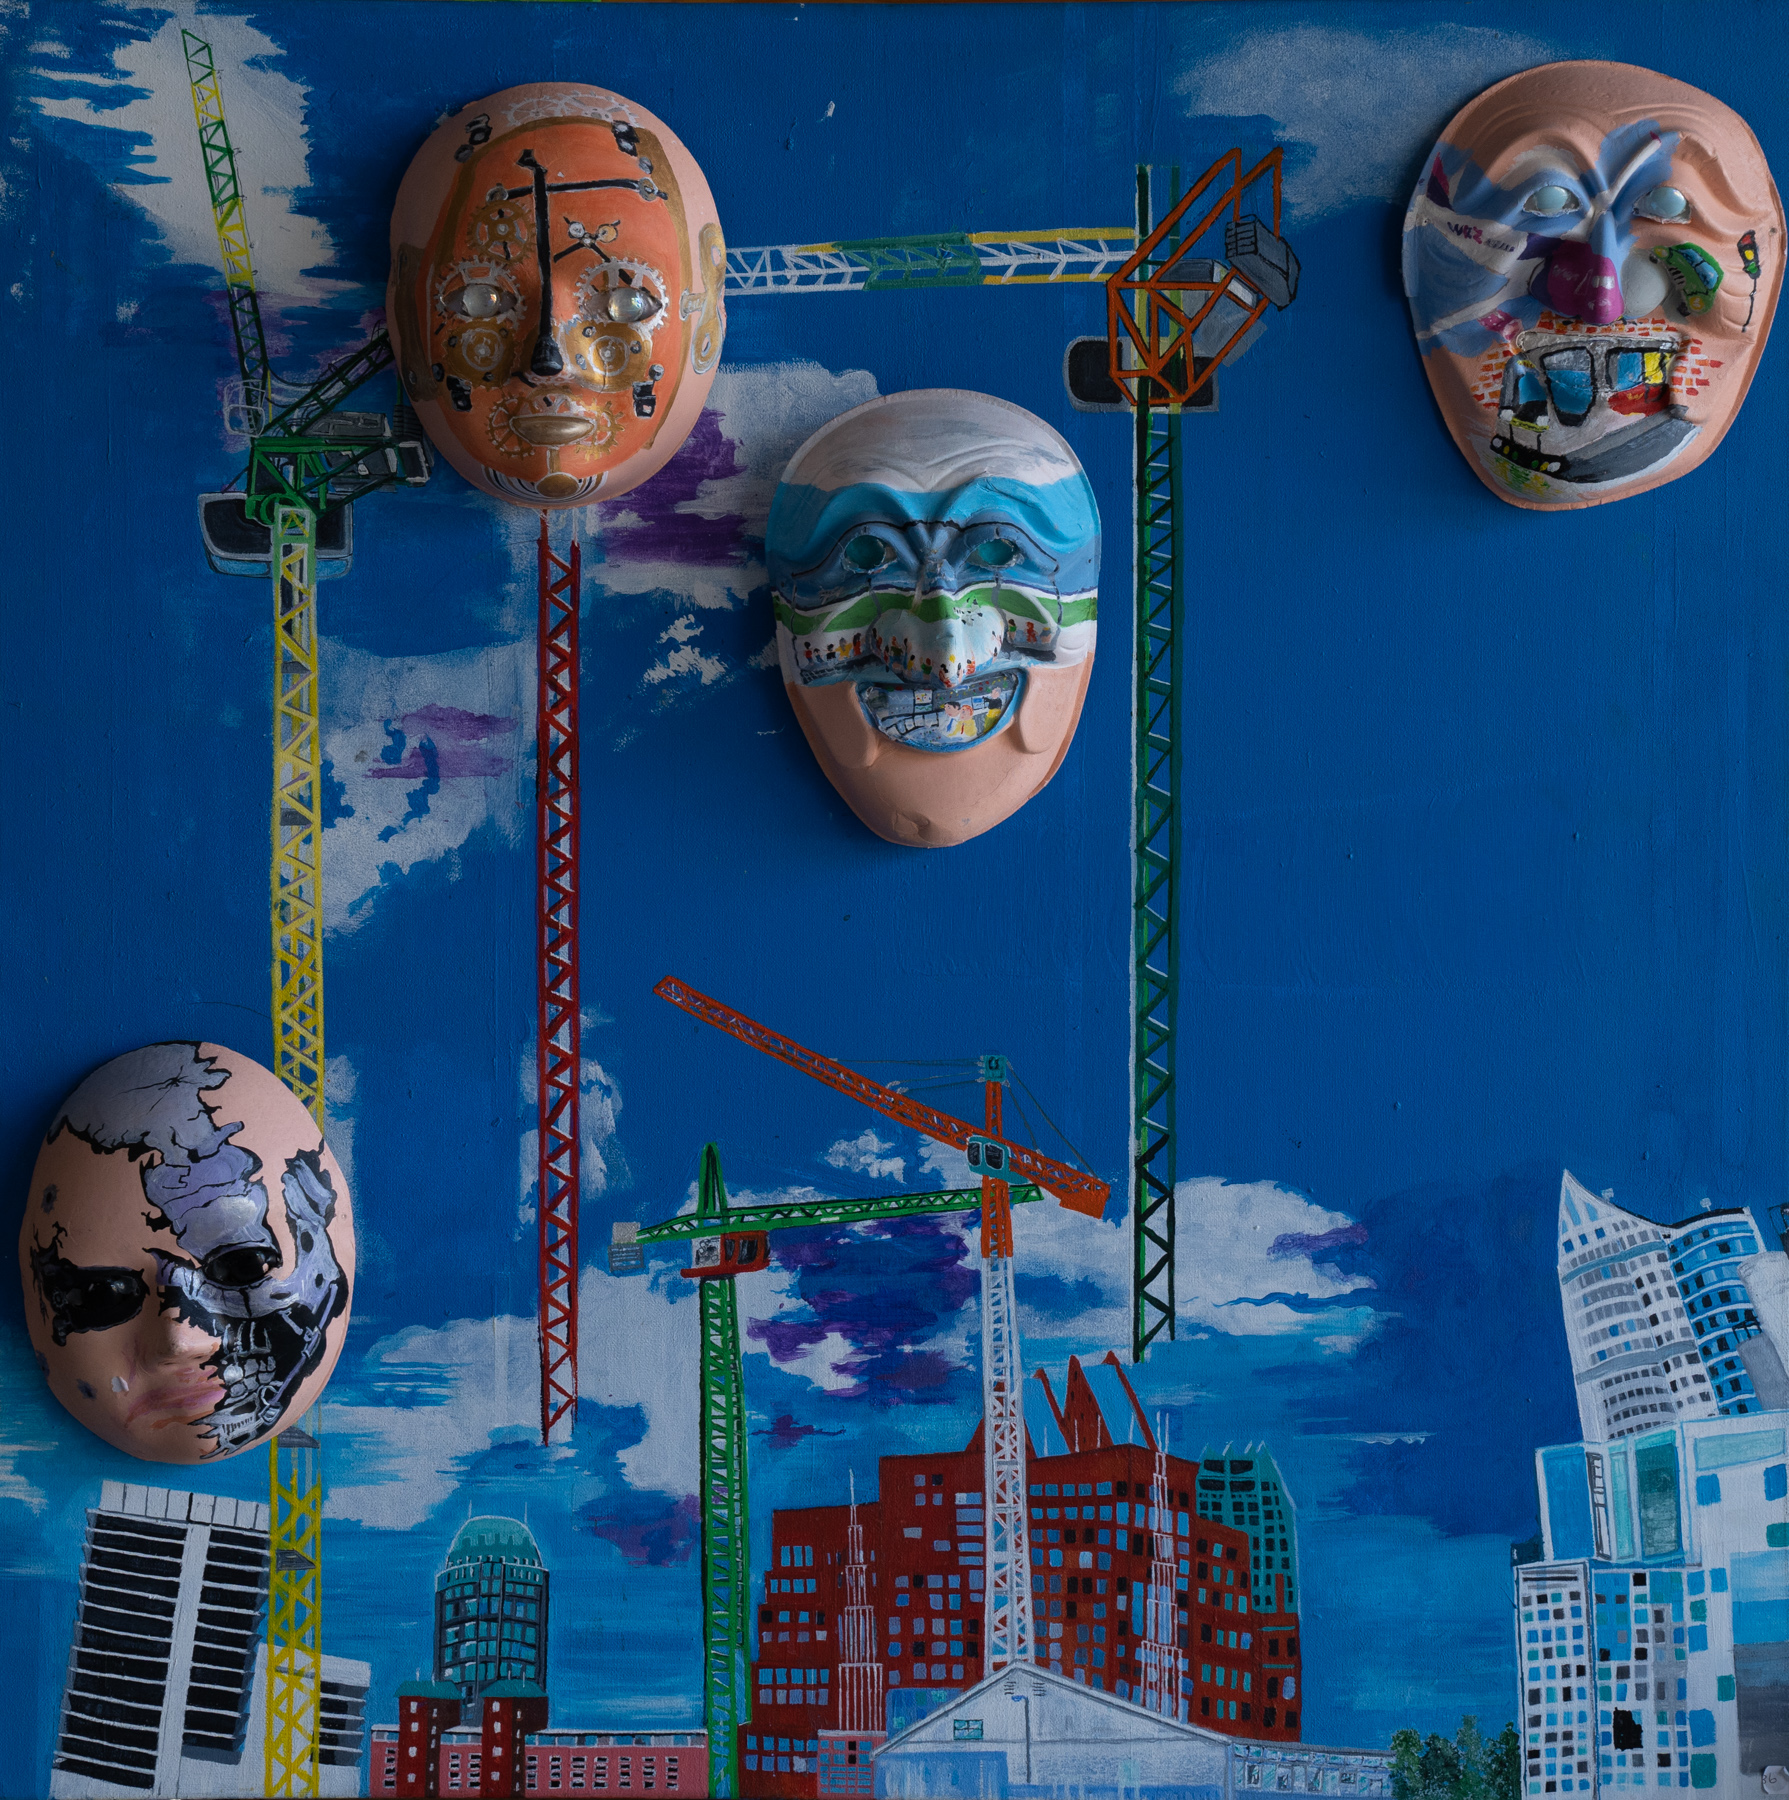 A painting of cranes over a city, with painted masks in the sky